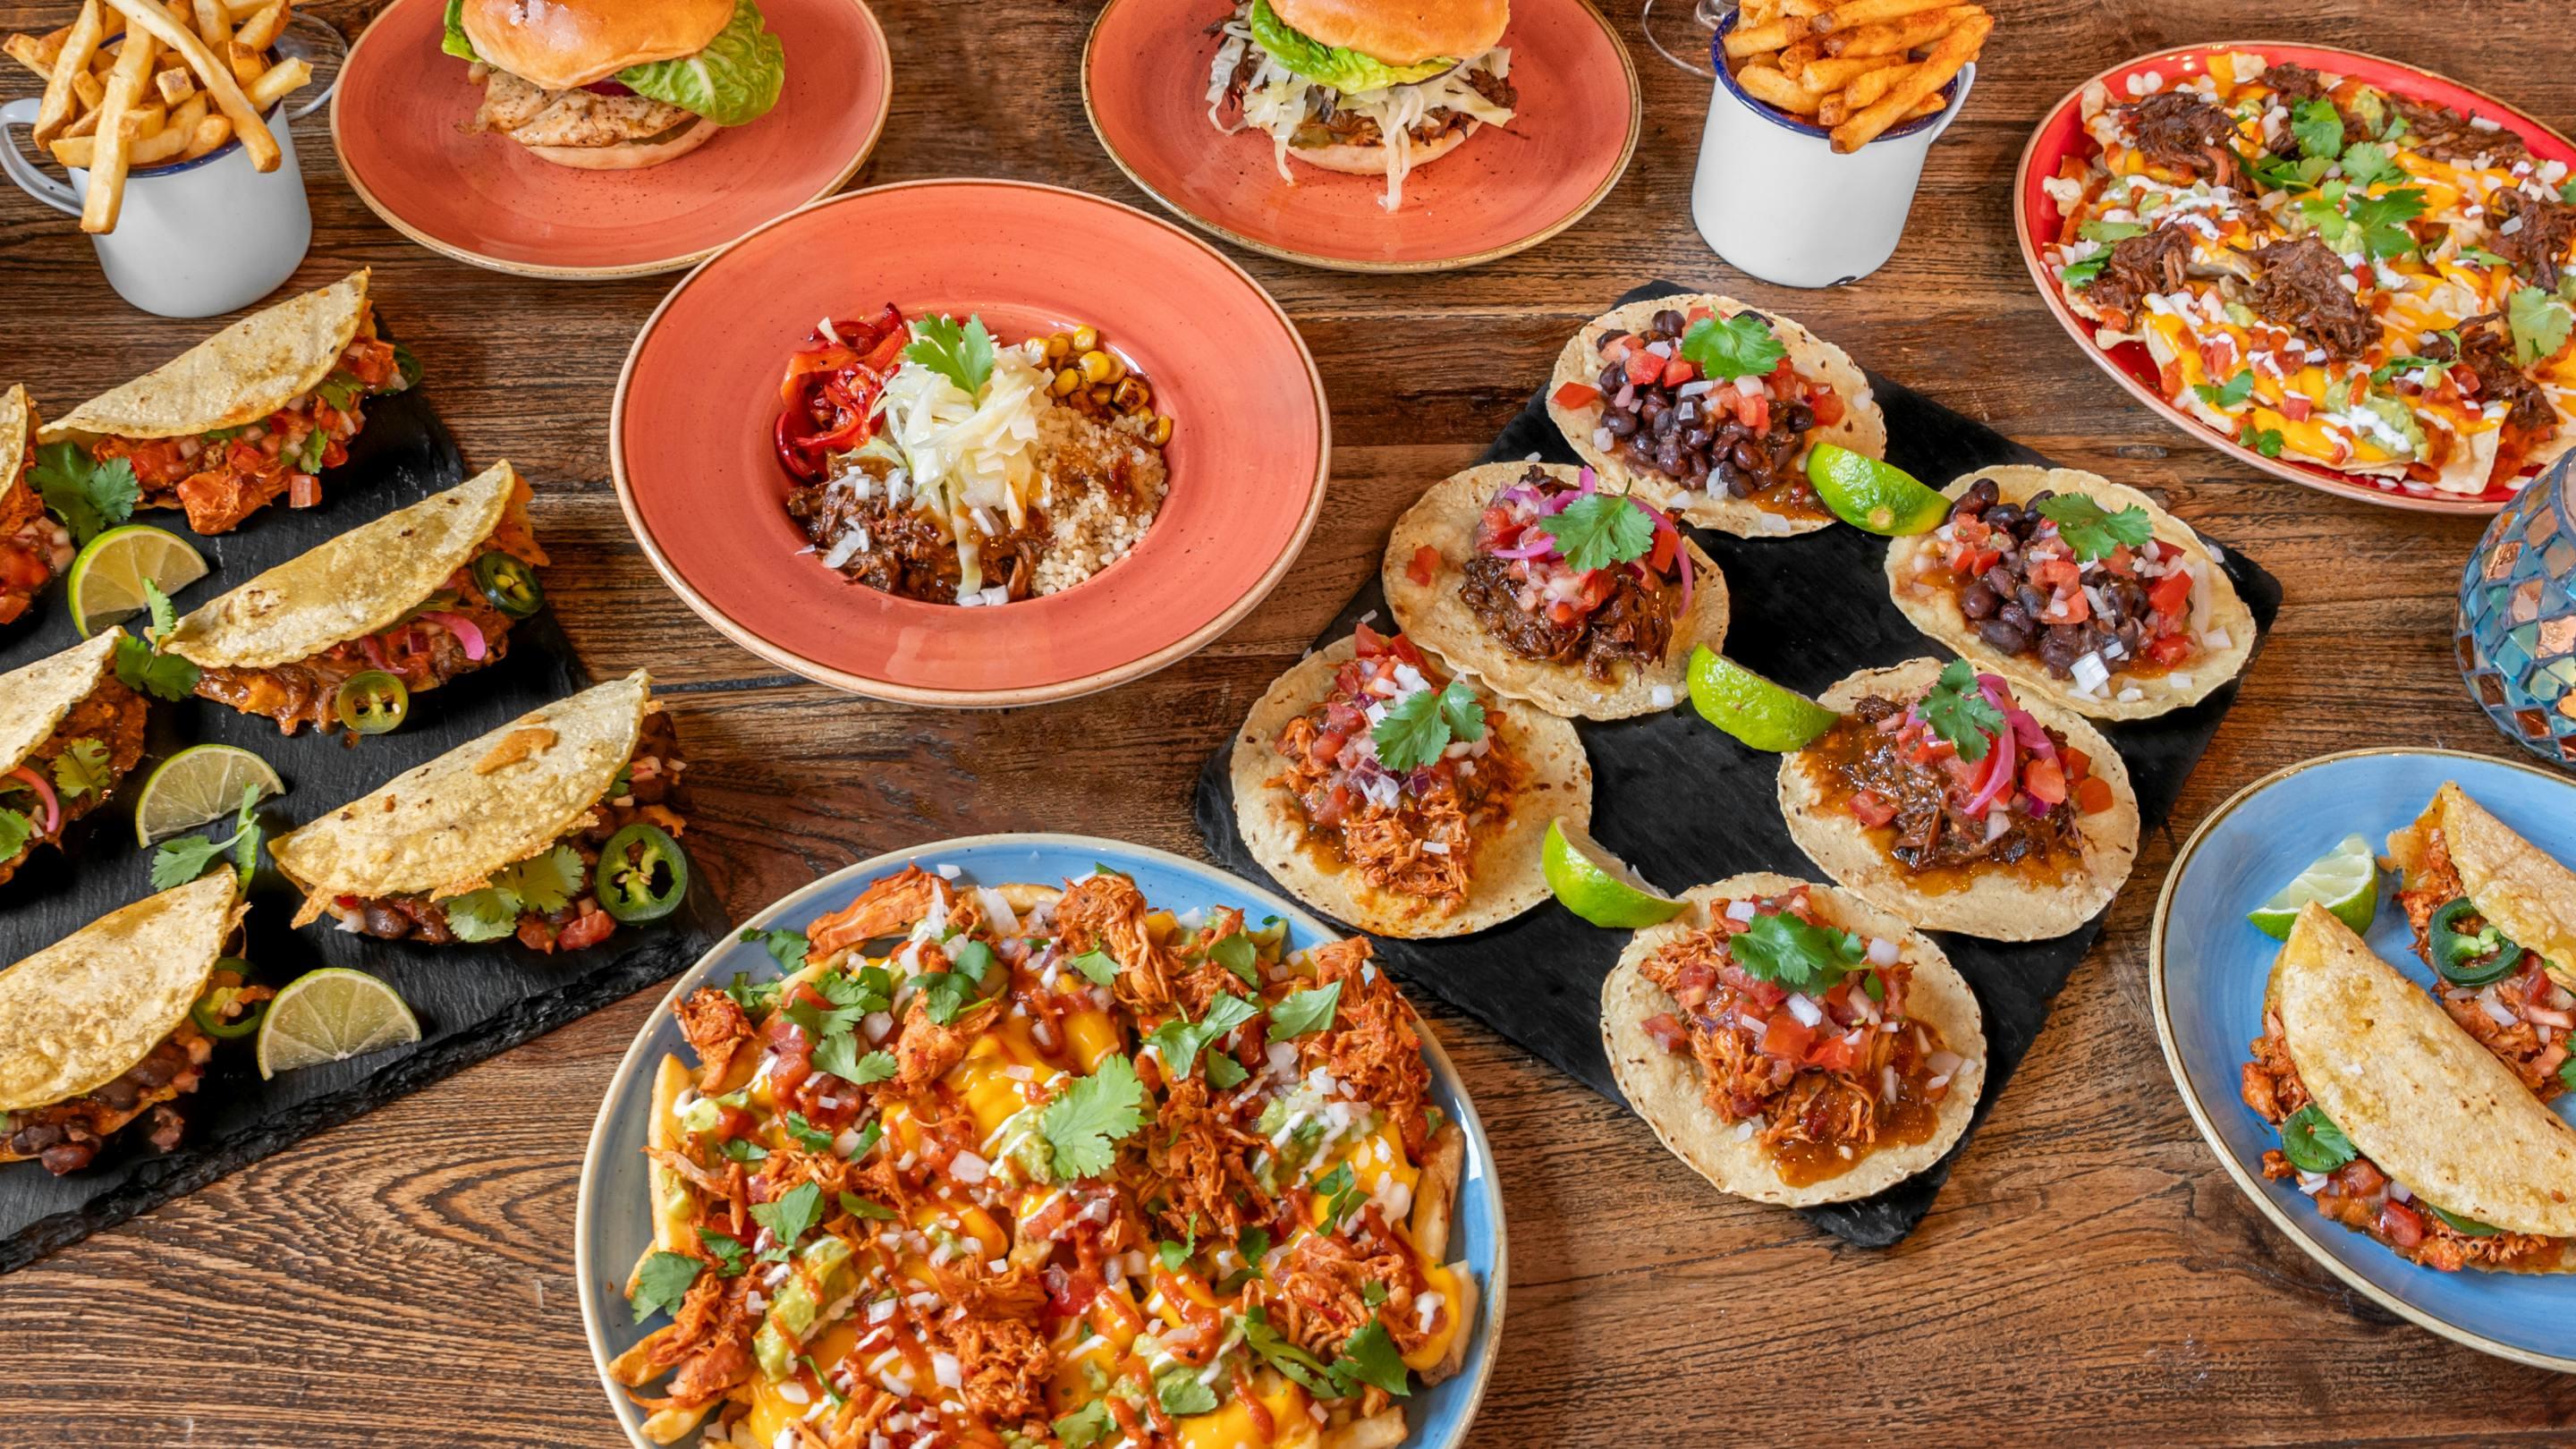 Tasty and colourful nachos and tacos on different plates across variety of colours